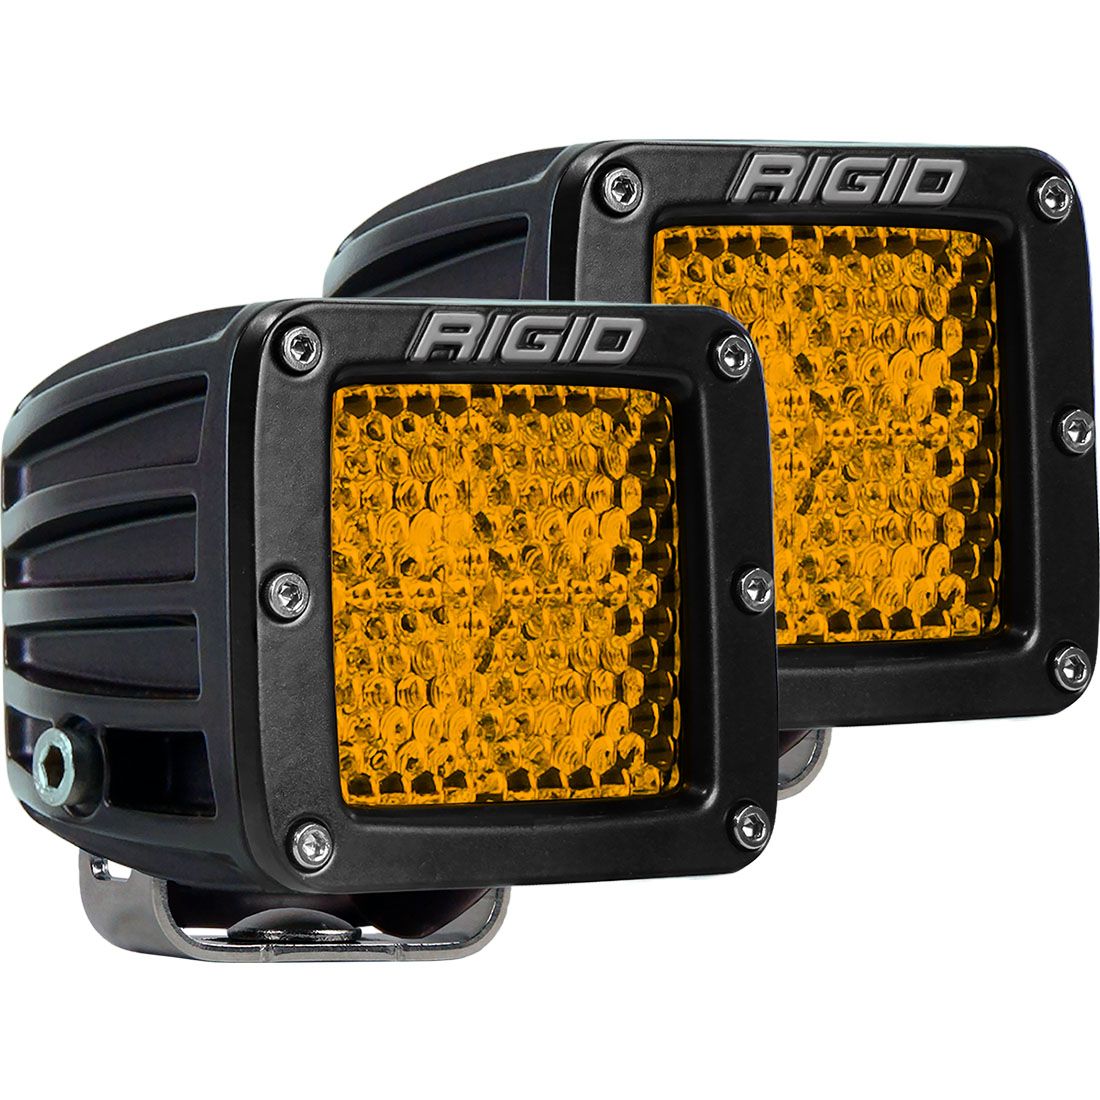 Diffused Rear Facing High/Low Pair D-Series Pro